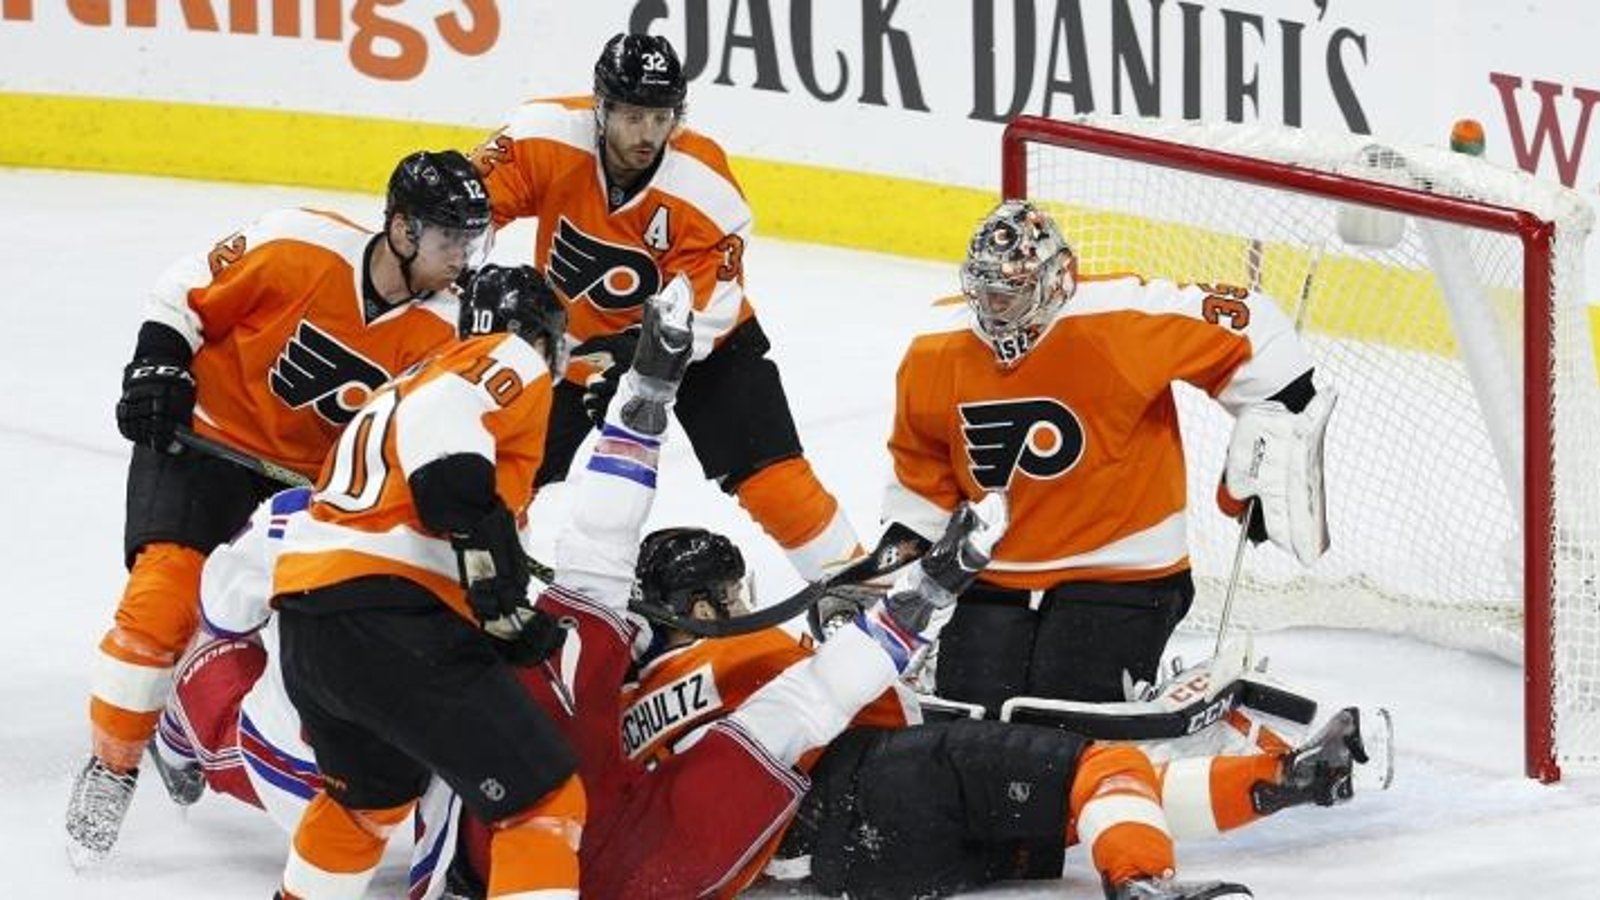 The Flyers were in fact hiding something yesterday, an injury to a core player.